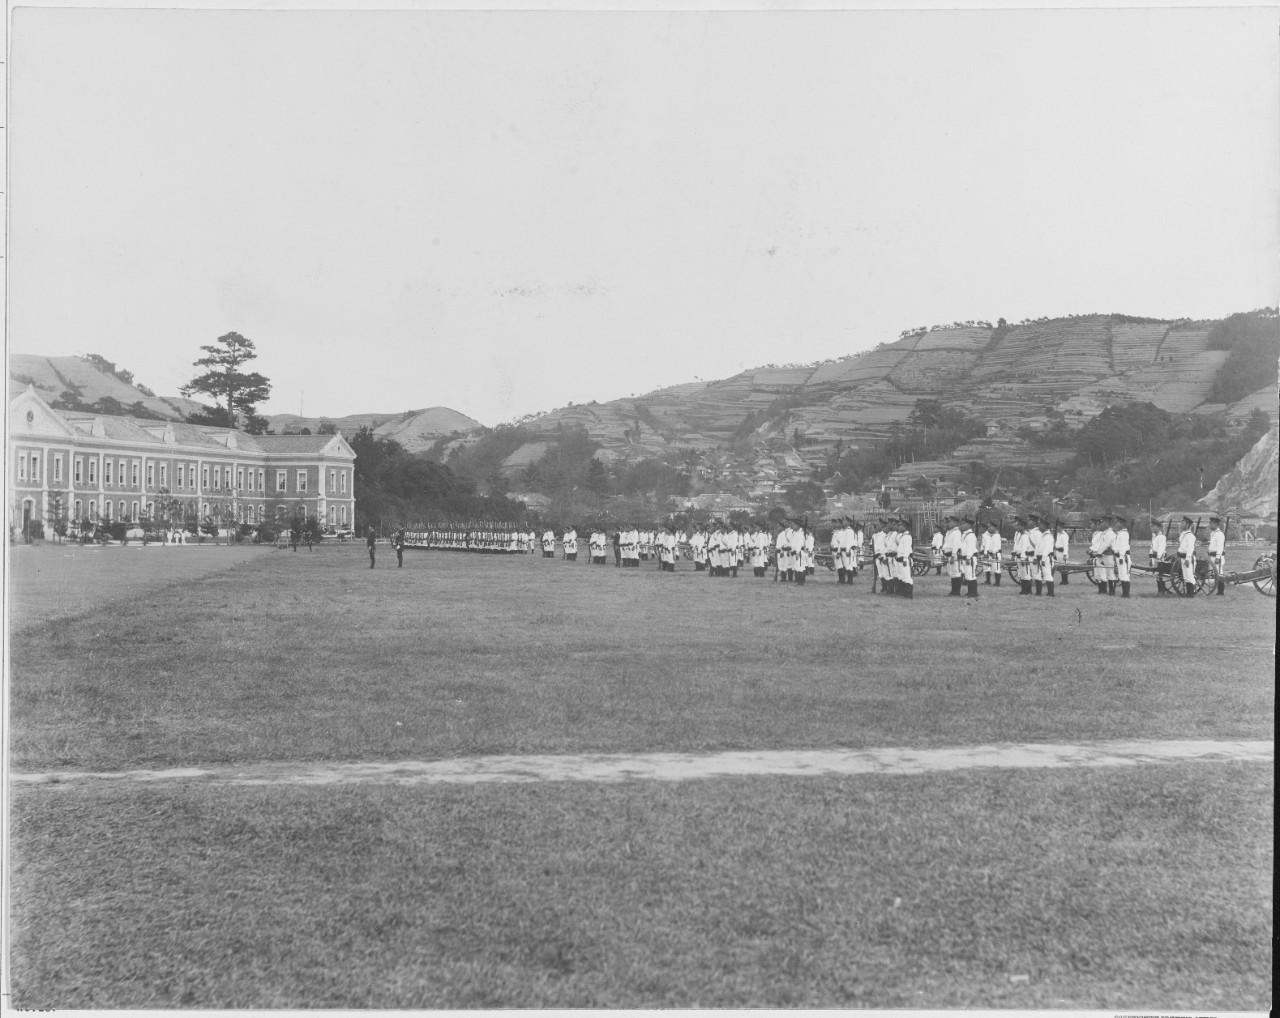 Japanese Cadets, Field exercises, October 28, 1899